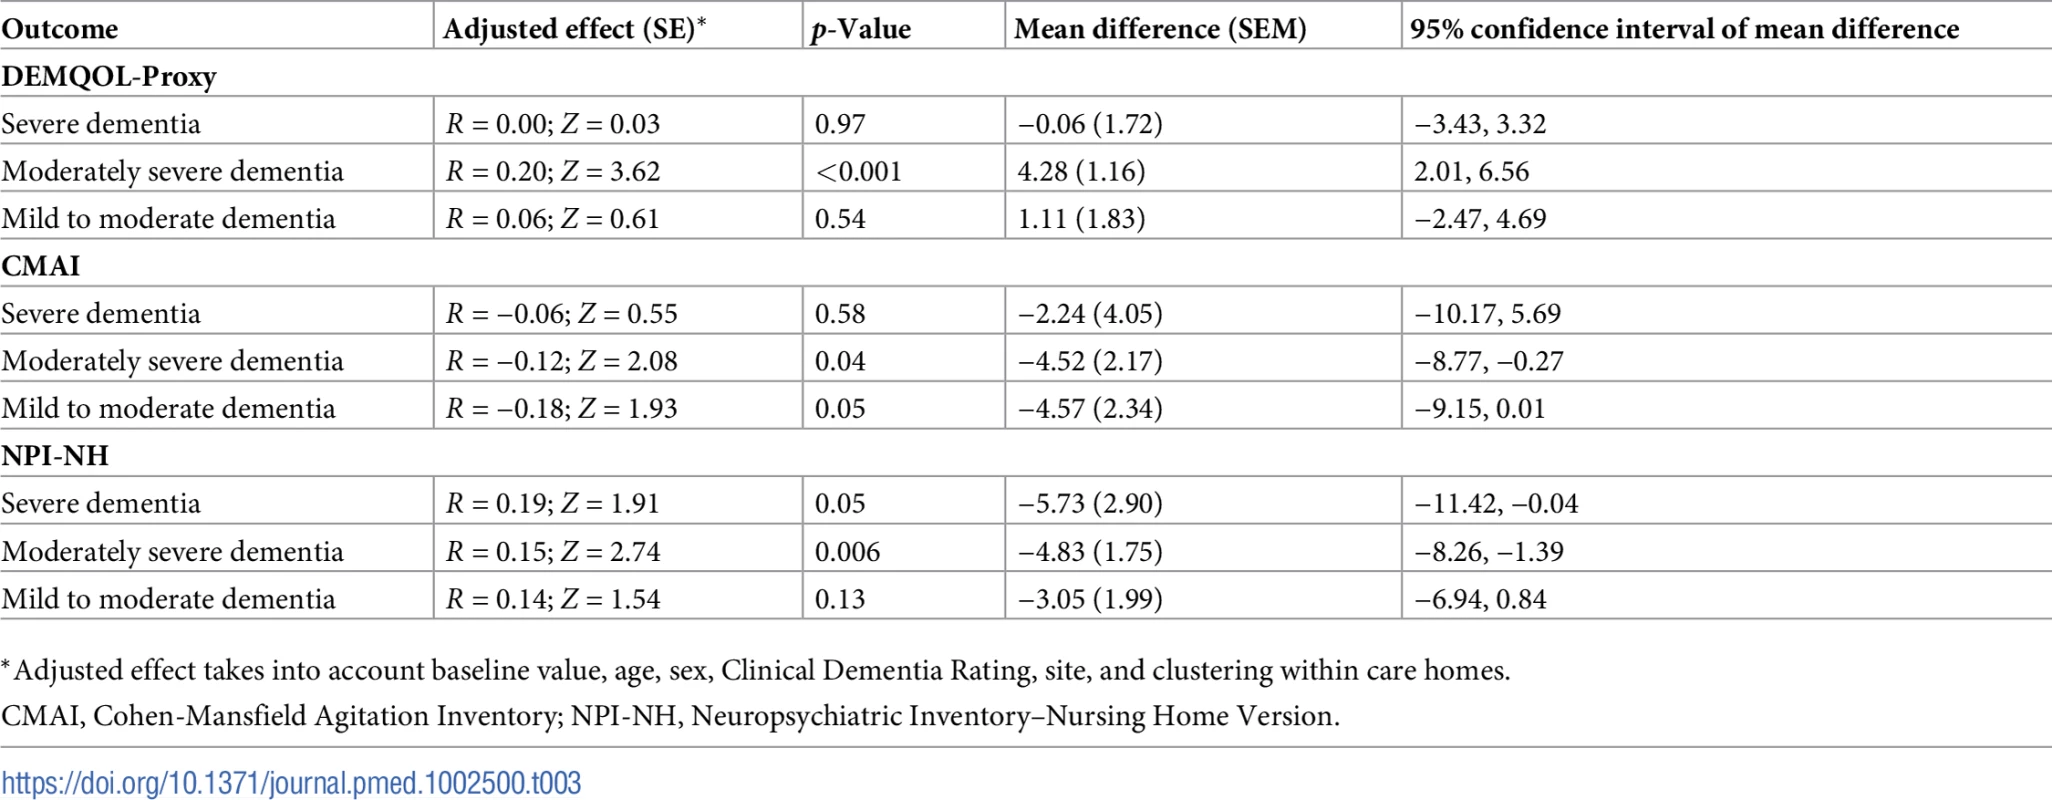 Effect estimates of the WHELD intervention in comparison to treatment as usual for key outcome measures (multiple imputation analysis): Sub-analysis evaluating impact of WHELD in mild to moderate, moderately severe, and severe dementia.